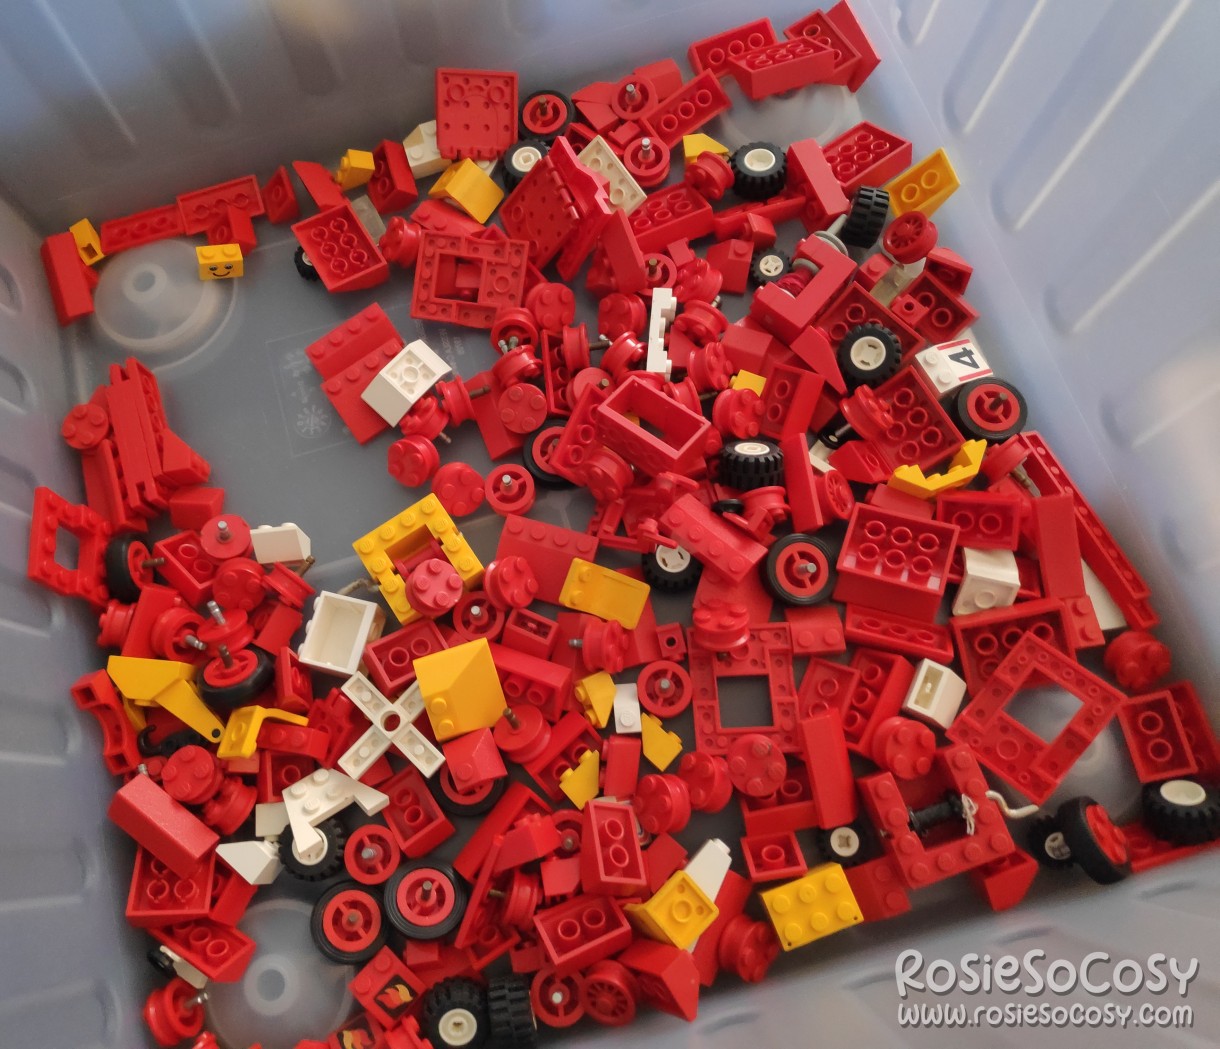 New batch of old LEGO bricks and parts. Mostly red bricks, some yellow, some wheels.